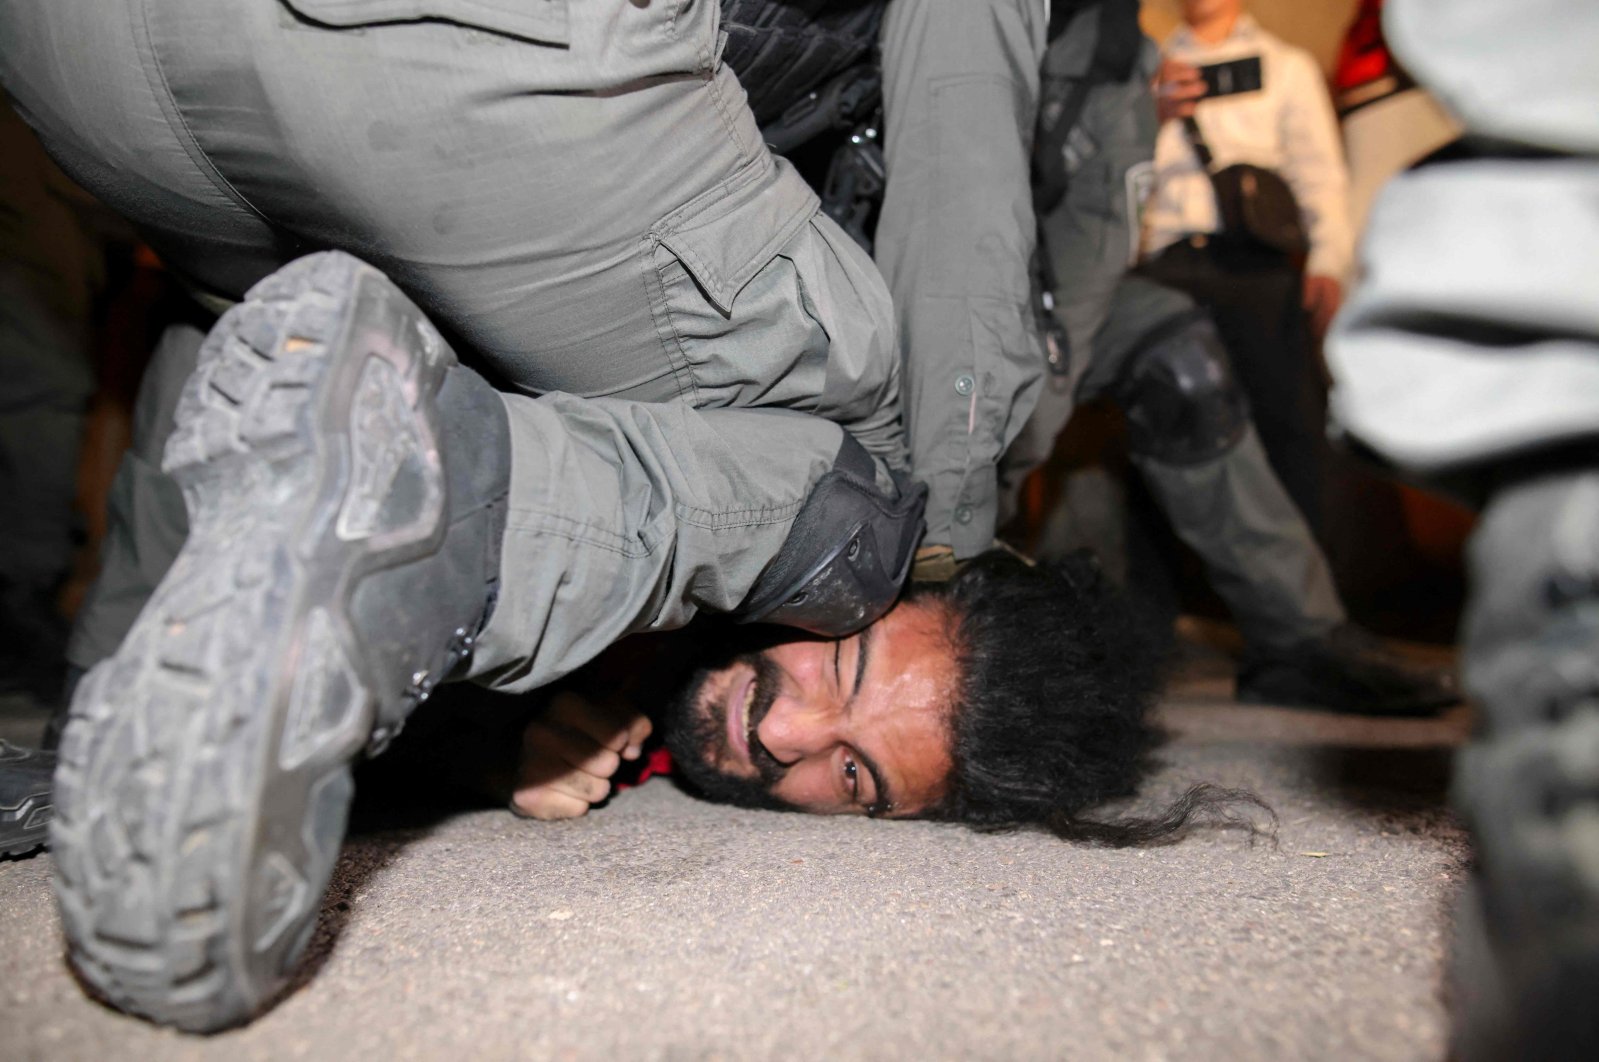 Israeli security forces detain a Palestinian man amid ongoing confrontations as Palestinian families face eviction in the Sheikh Jarrah neighbourhood of East Jerusalem, occupied Palestine, on May 4, 2021. (AFP Photo)